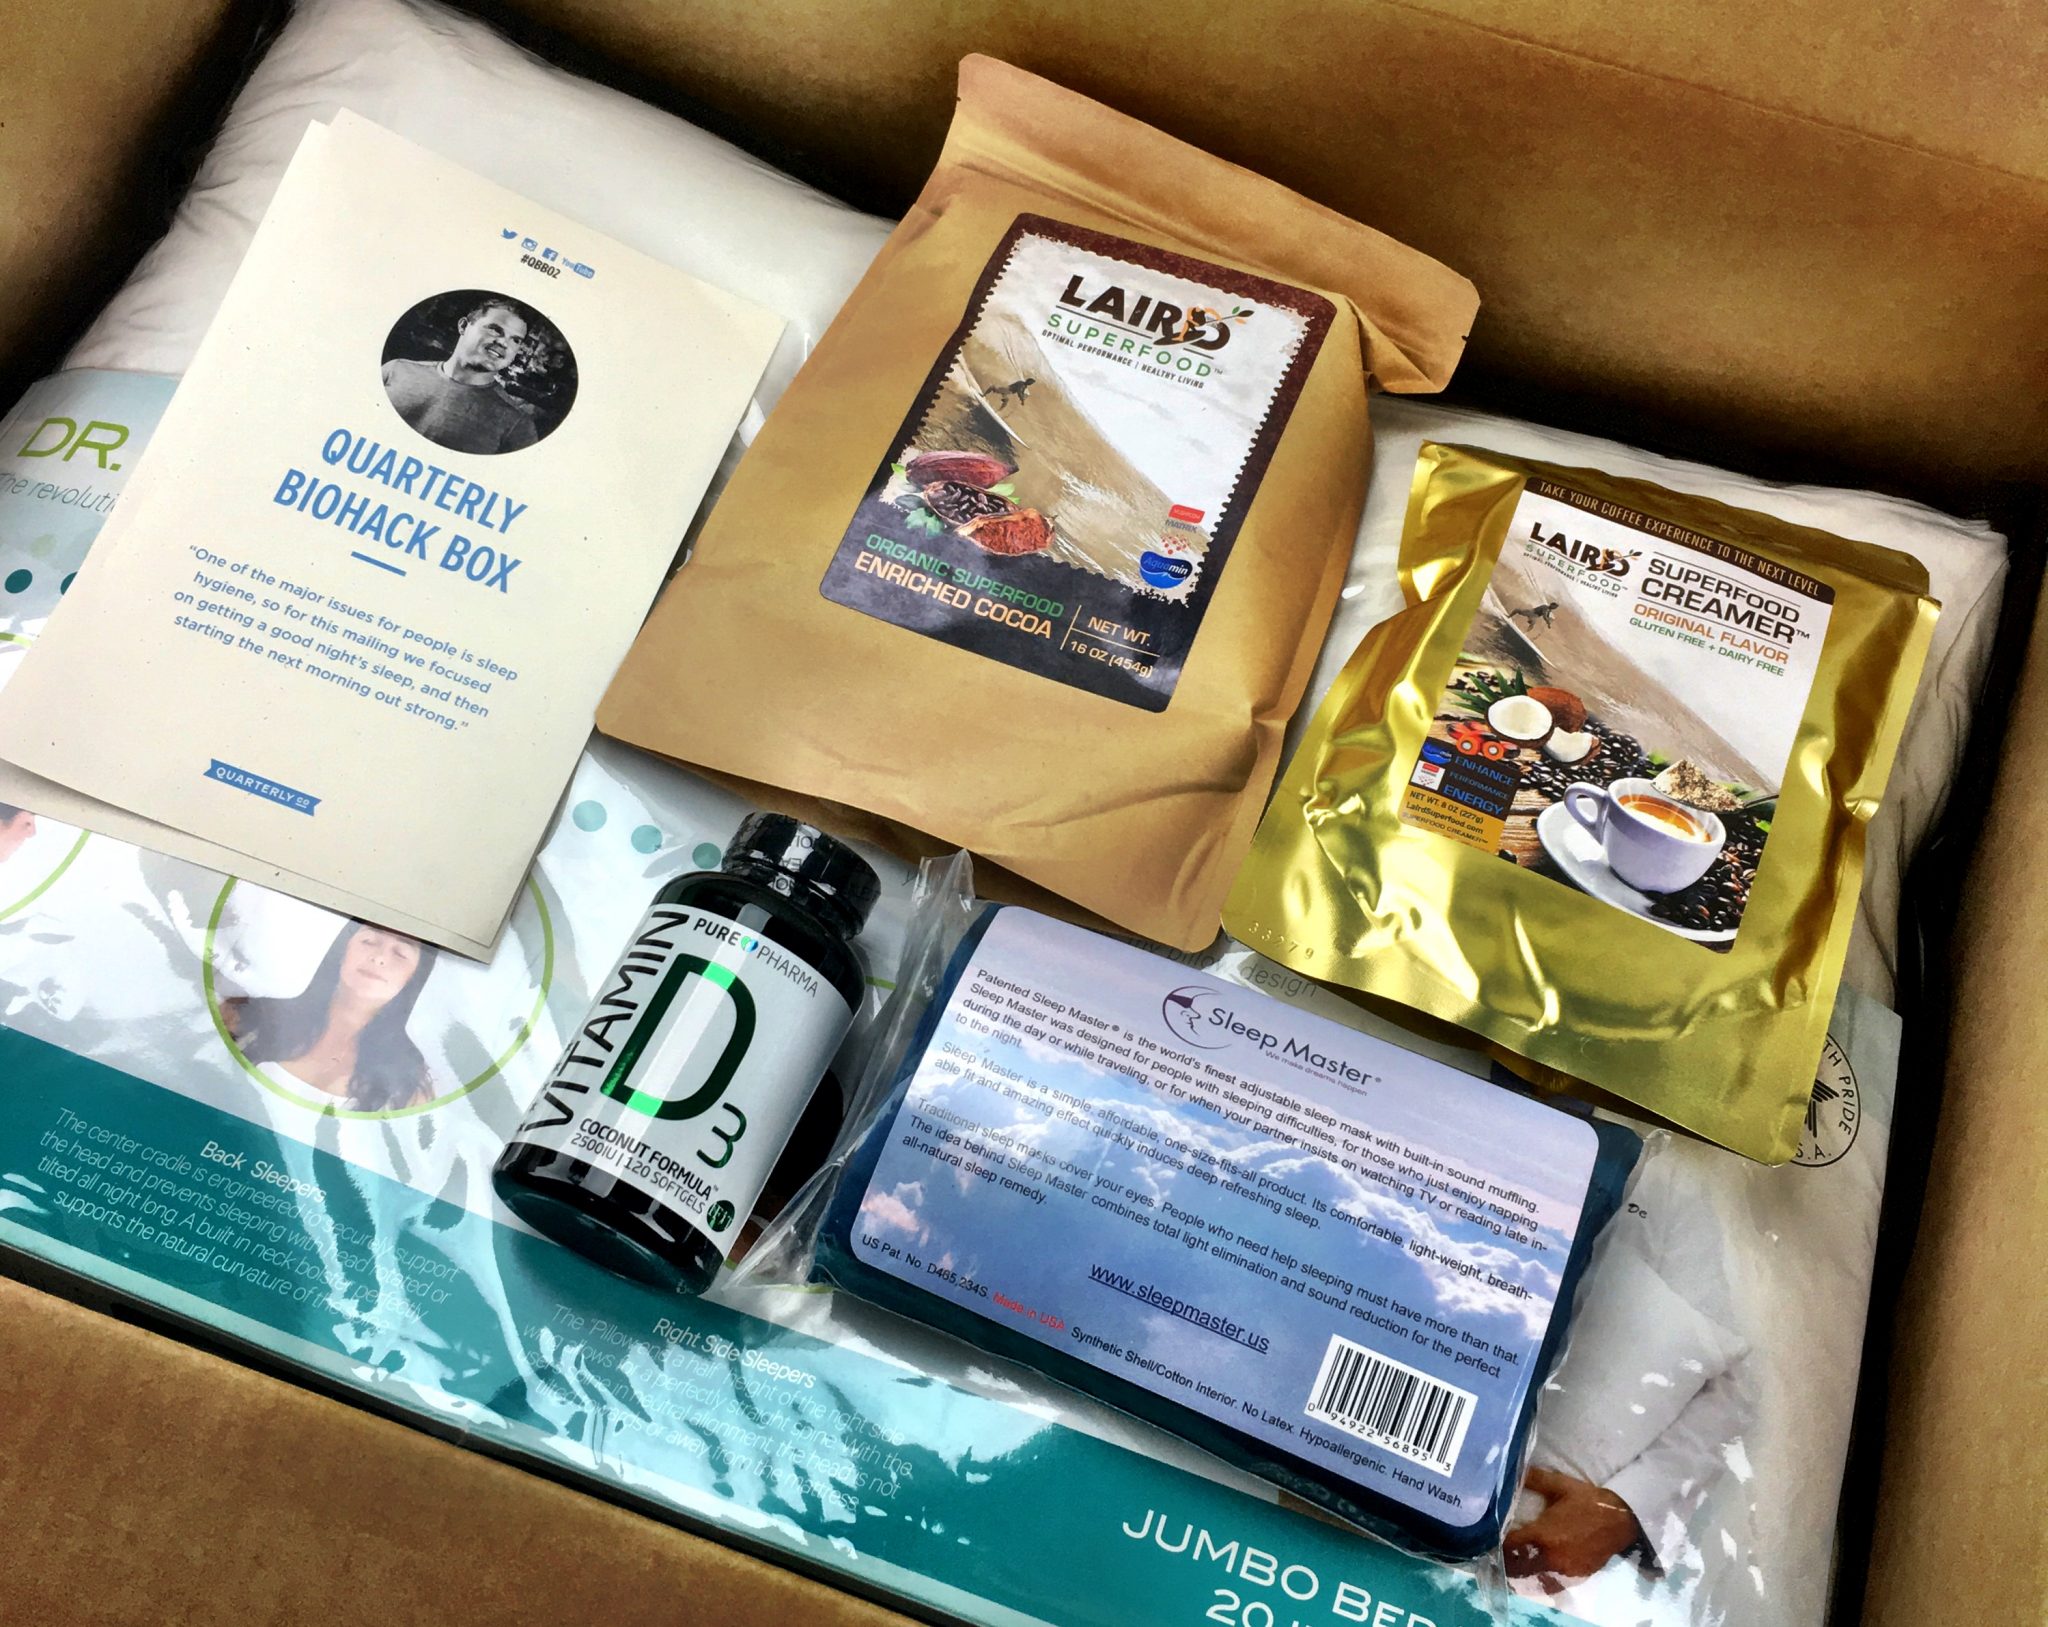 The QBB02 Shipment from Quarterly